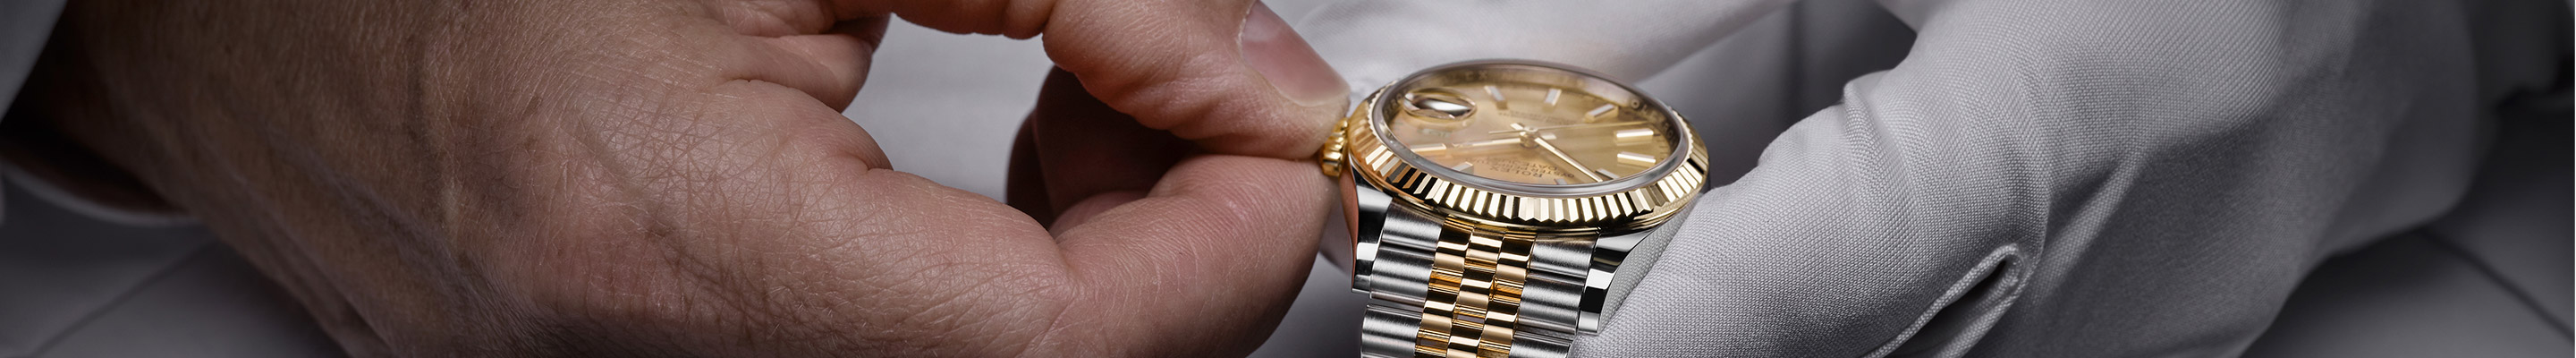 Servicing Your Rolex Cover